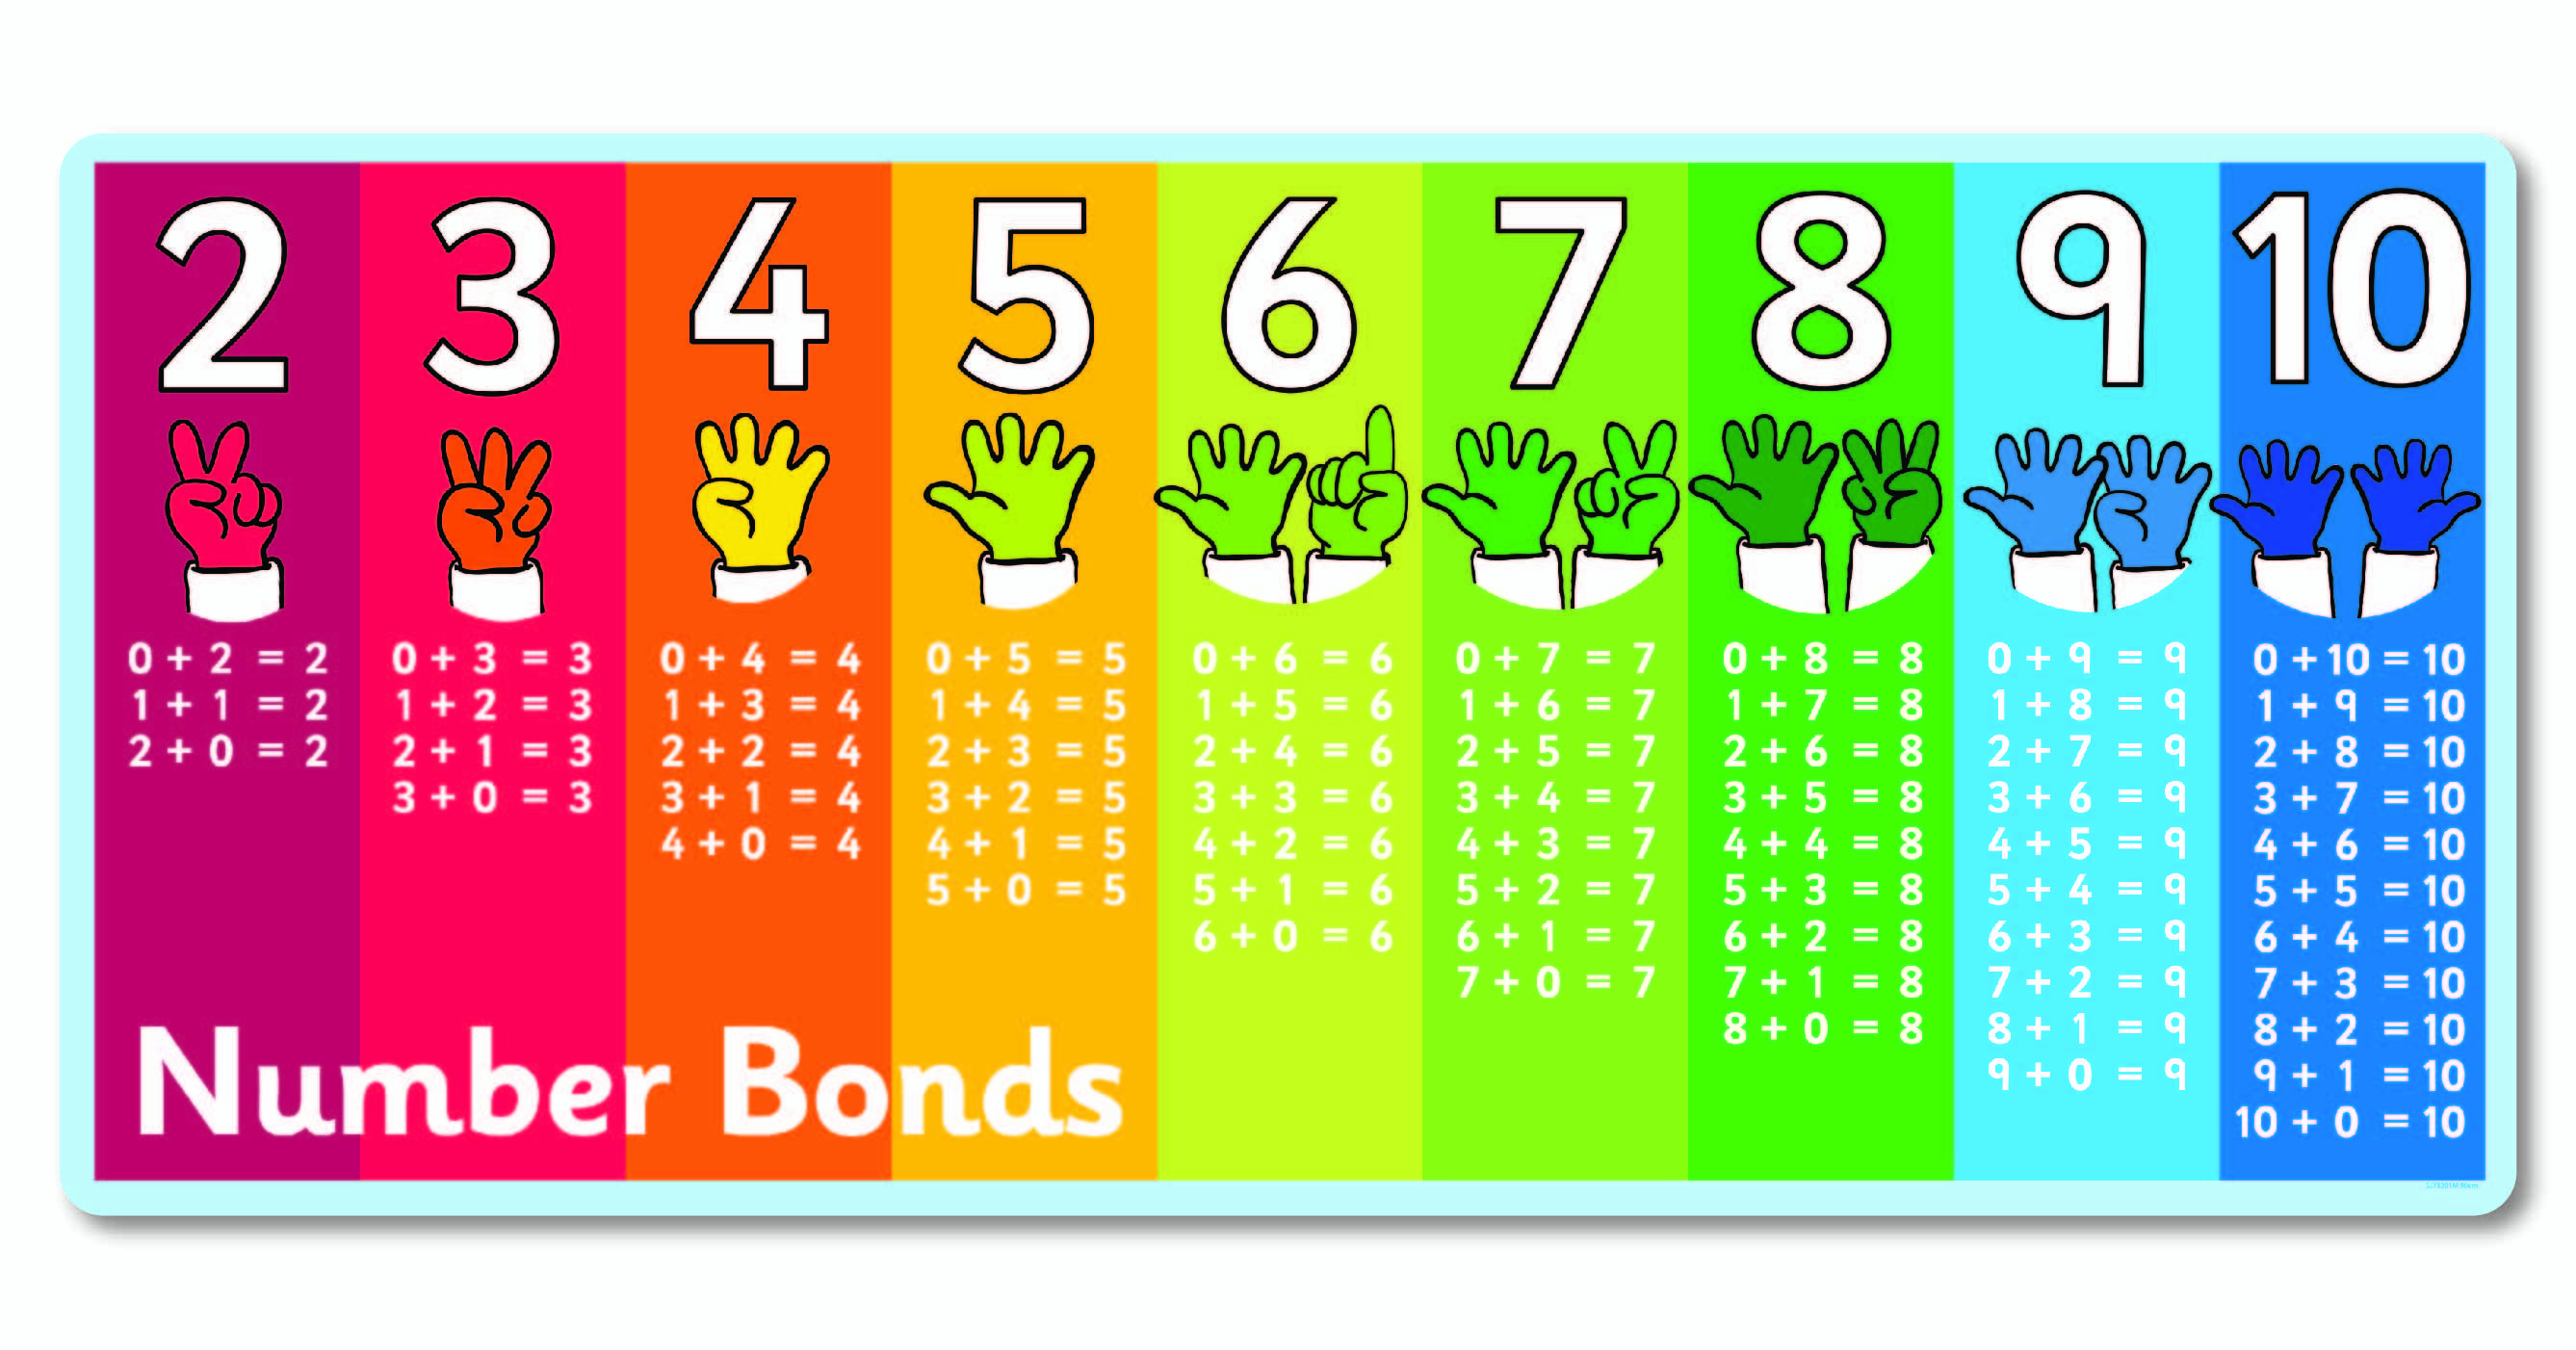 bonds-to-10-recall-number-bonds-to-20-relate-to-number-bonds-to-10-tmubmusd10y-a